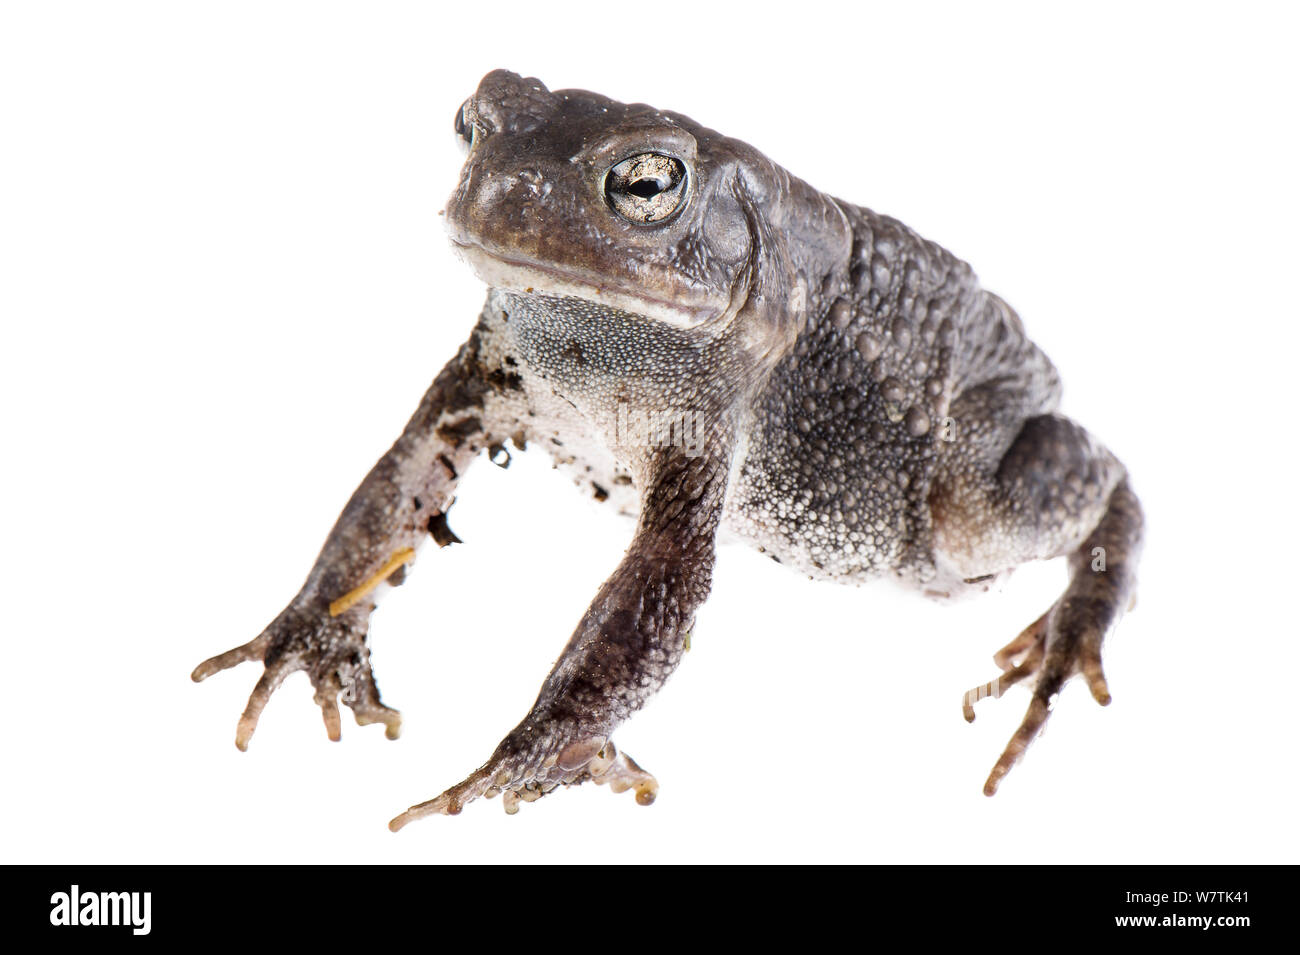 African common toad (Amietophrynus regularis) adult male, Botswana, April. Meetyourneighbours.net project Stock Photo